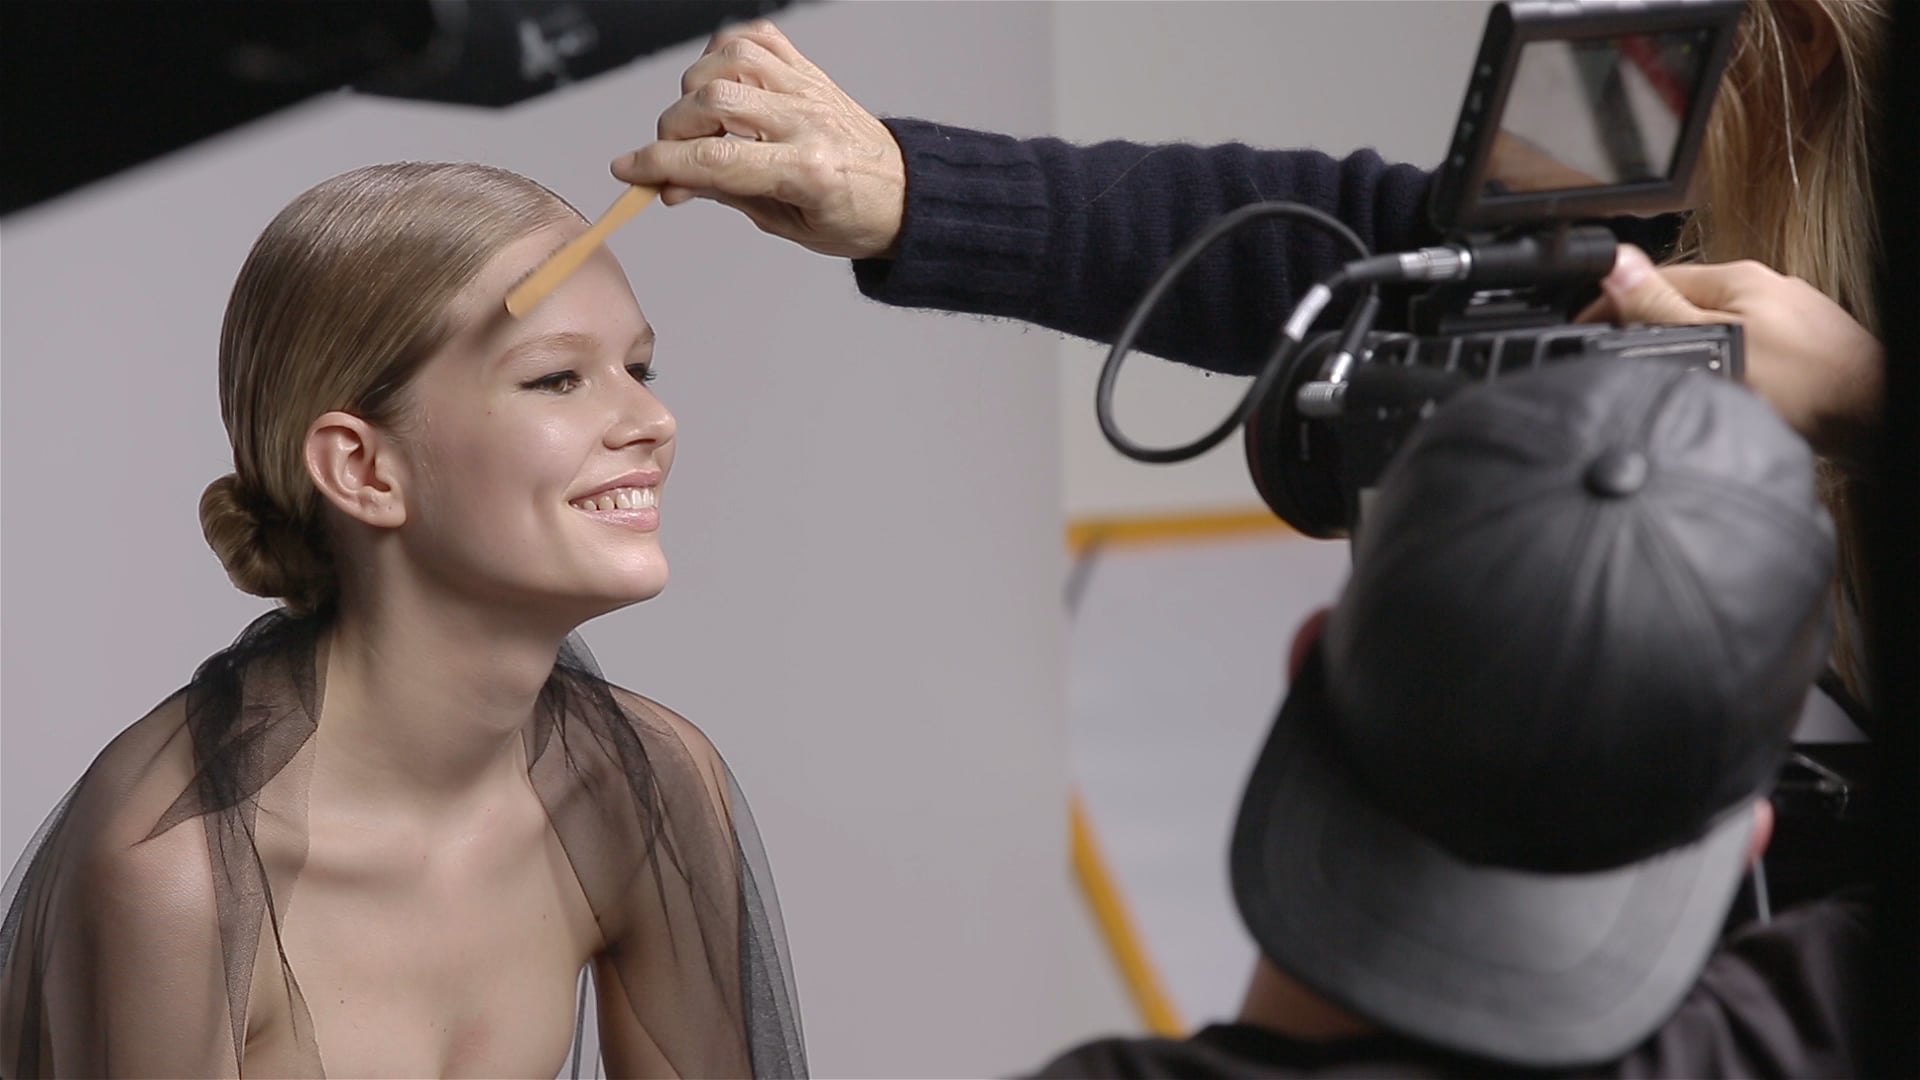 5 things to know about model of the moment, Anna Ewers